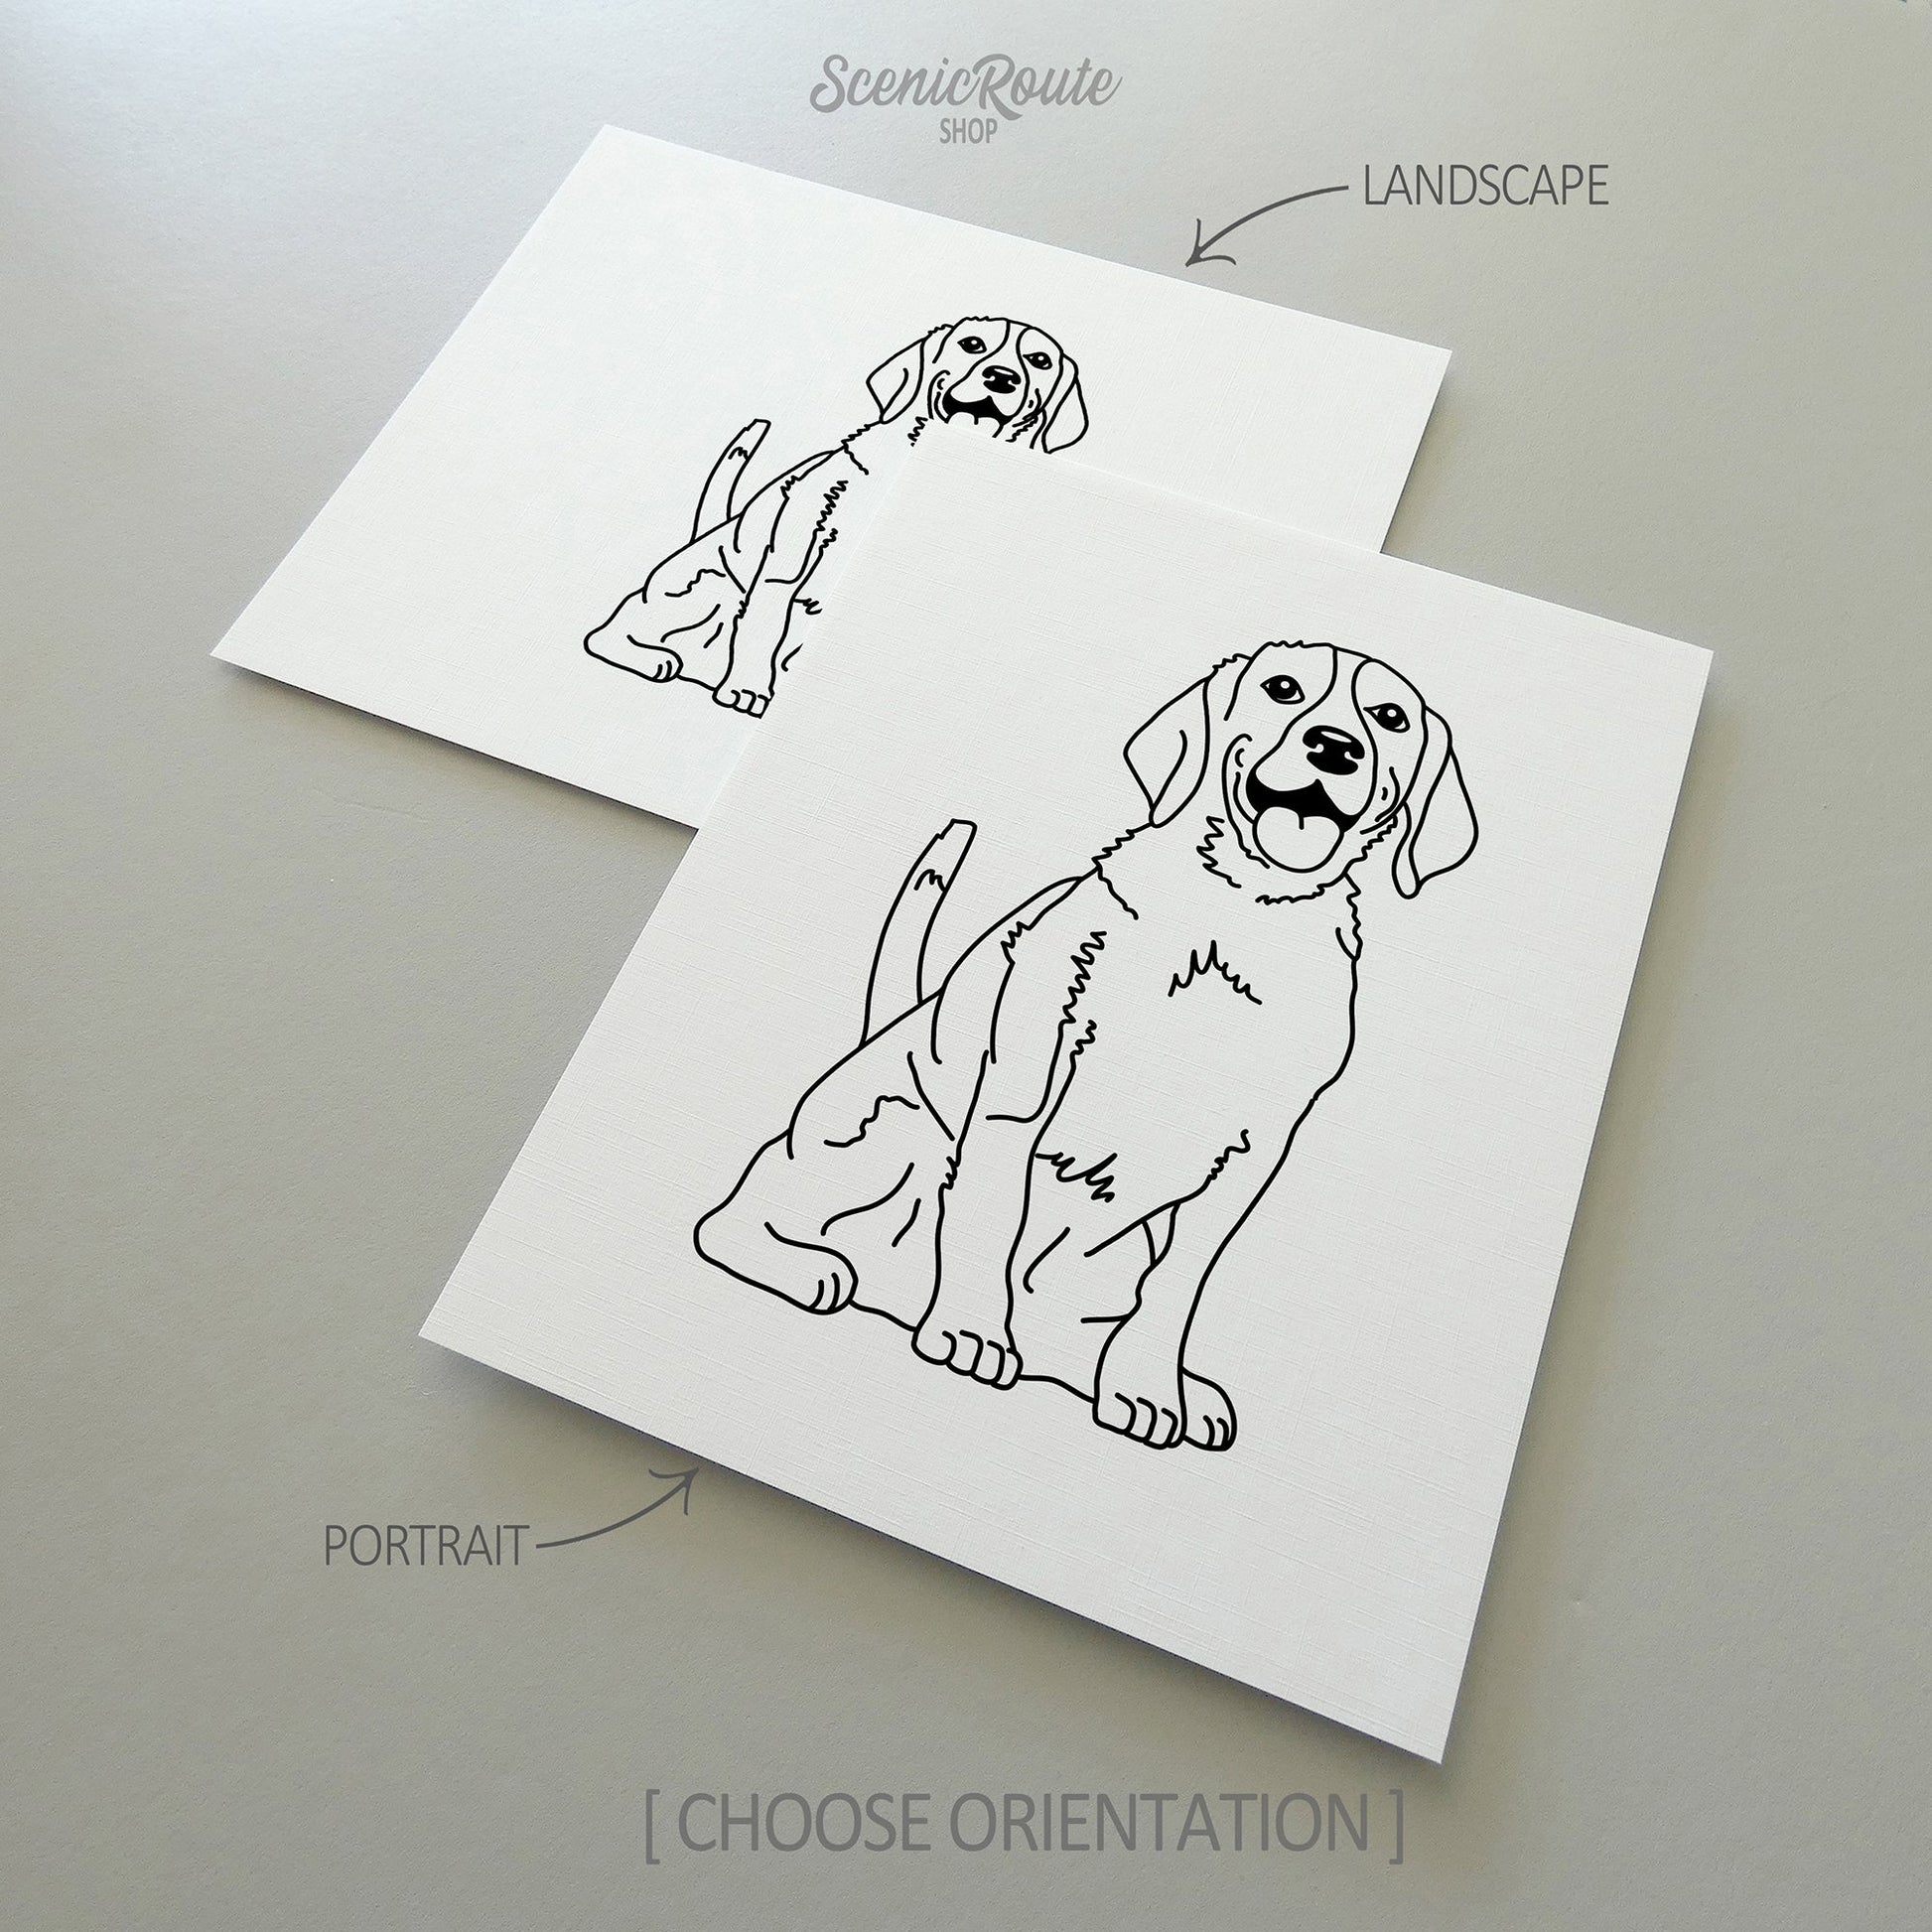 Two drawings of a Beagle dog on white linen paper with a gray background.  Pieces are shown in portrait and landscape orientation options to illustrate the available art print options.